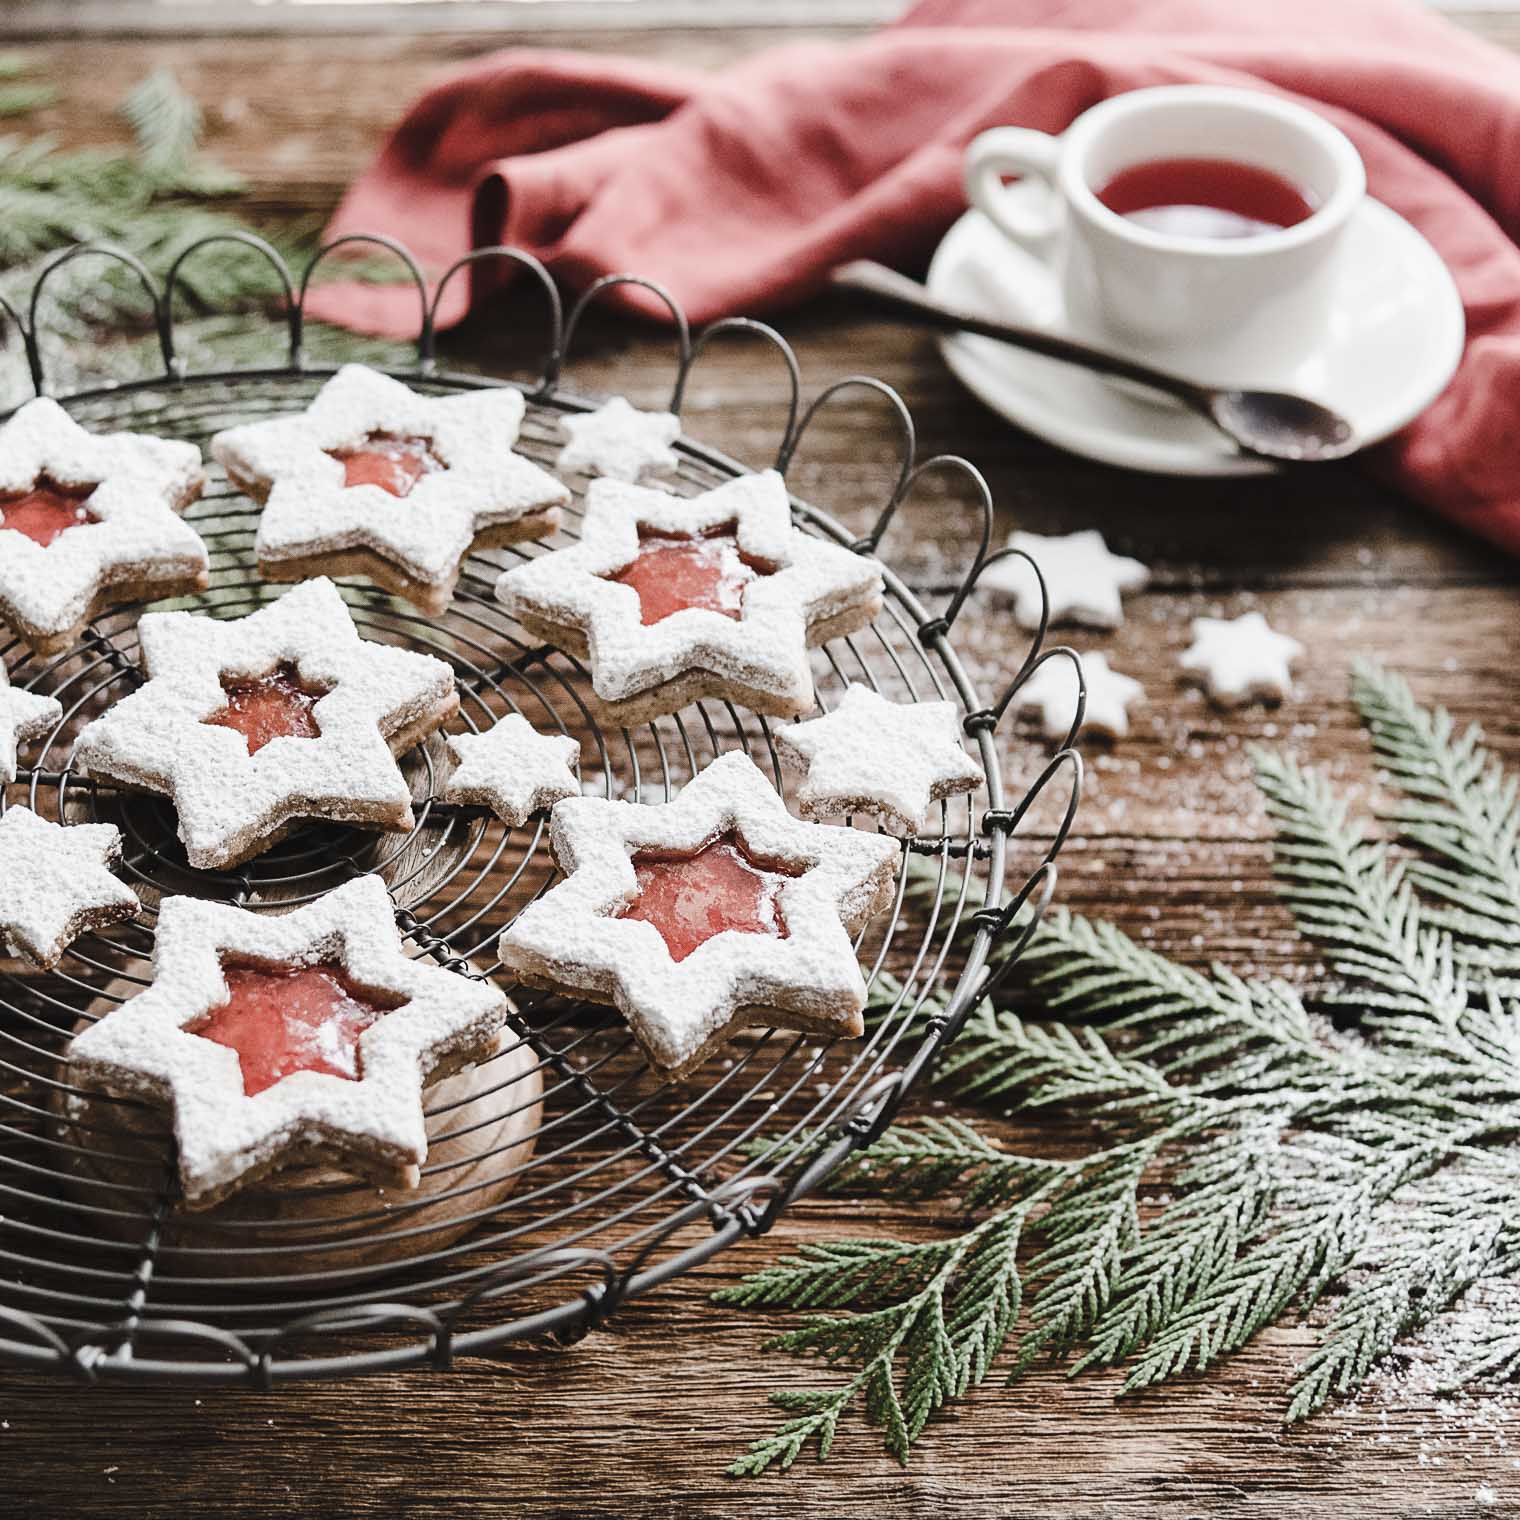 Christmas Cookie Recipes, Keeping With the Times